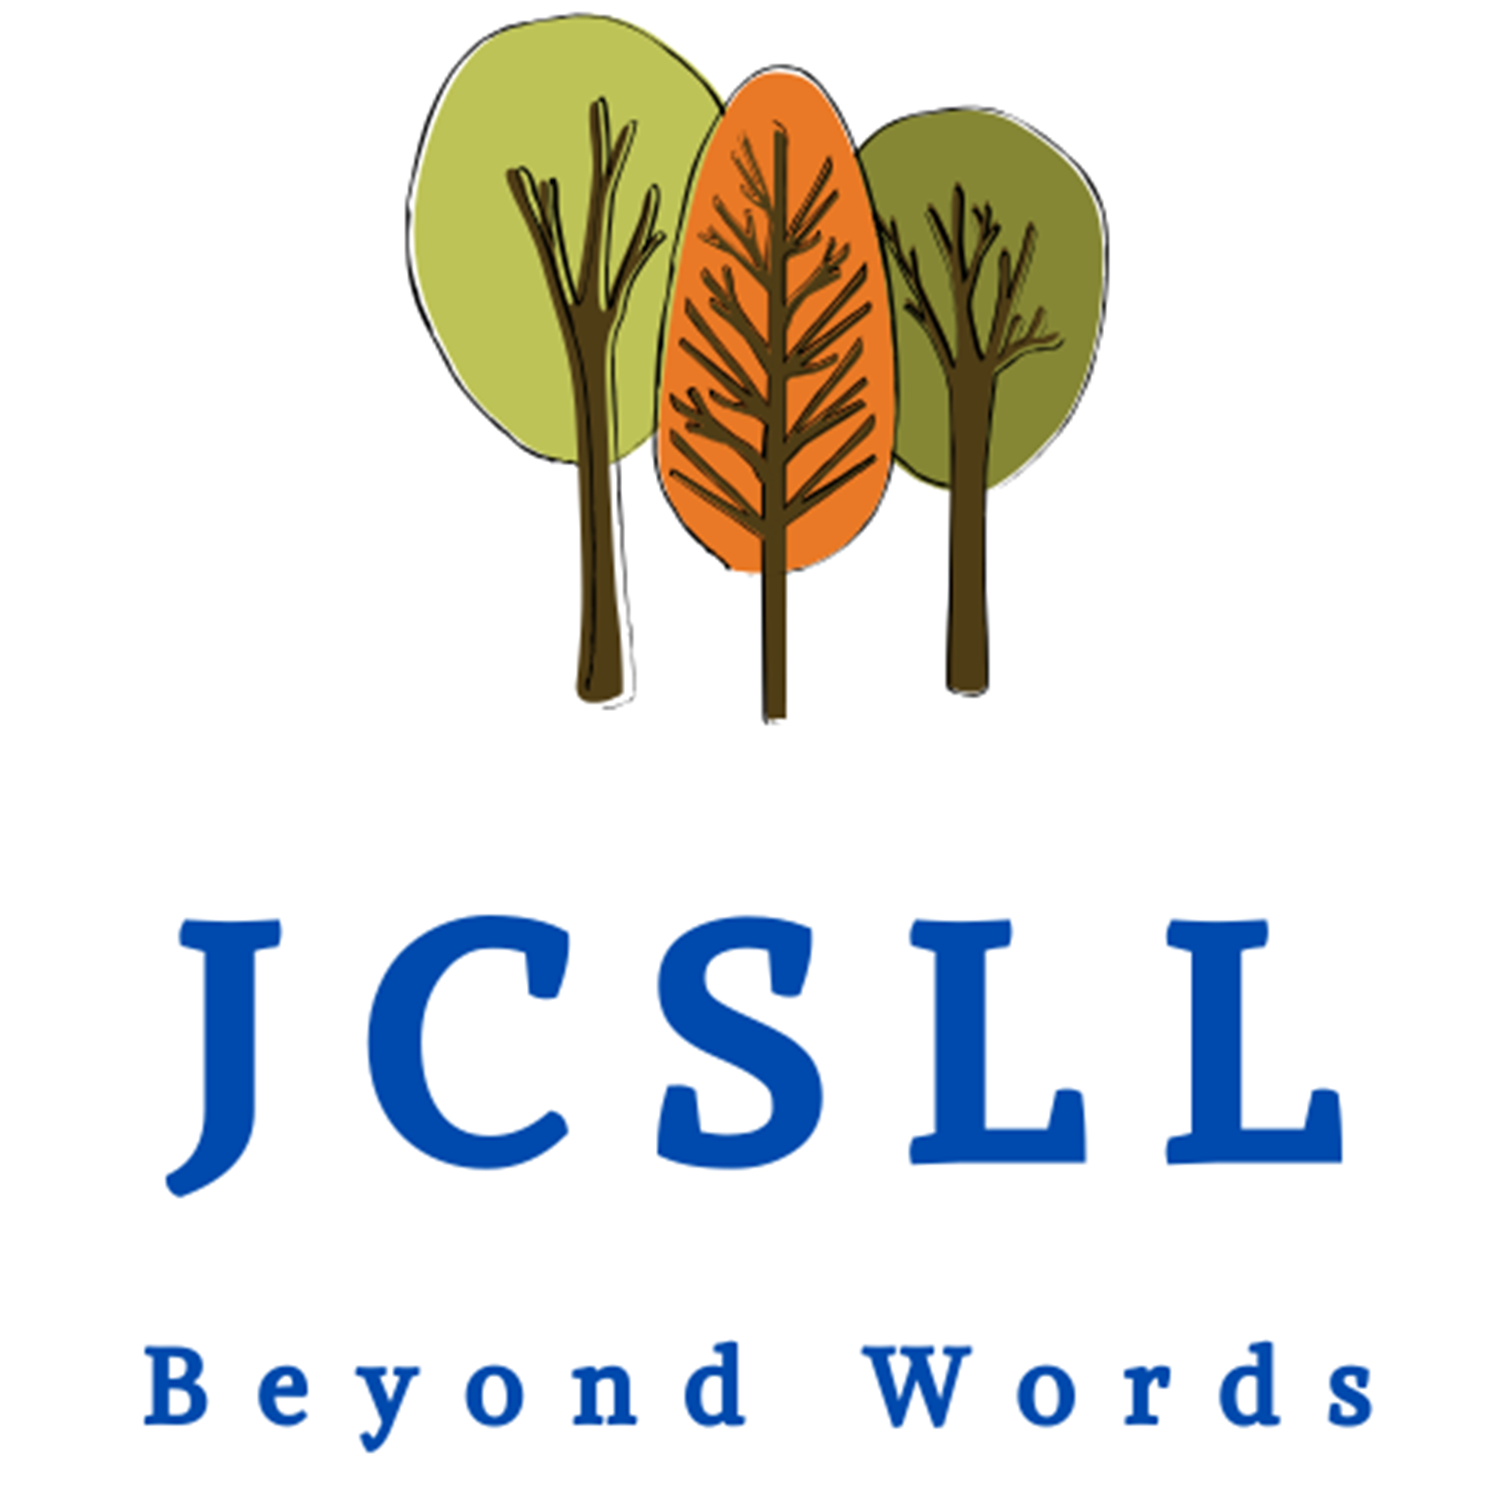 Journal of Critical Studies in Language and Literature